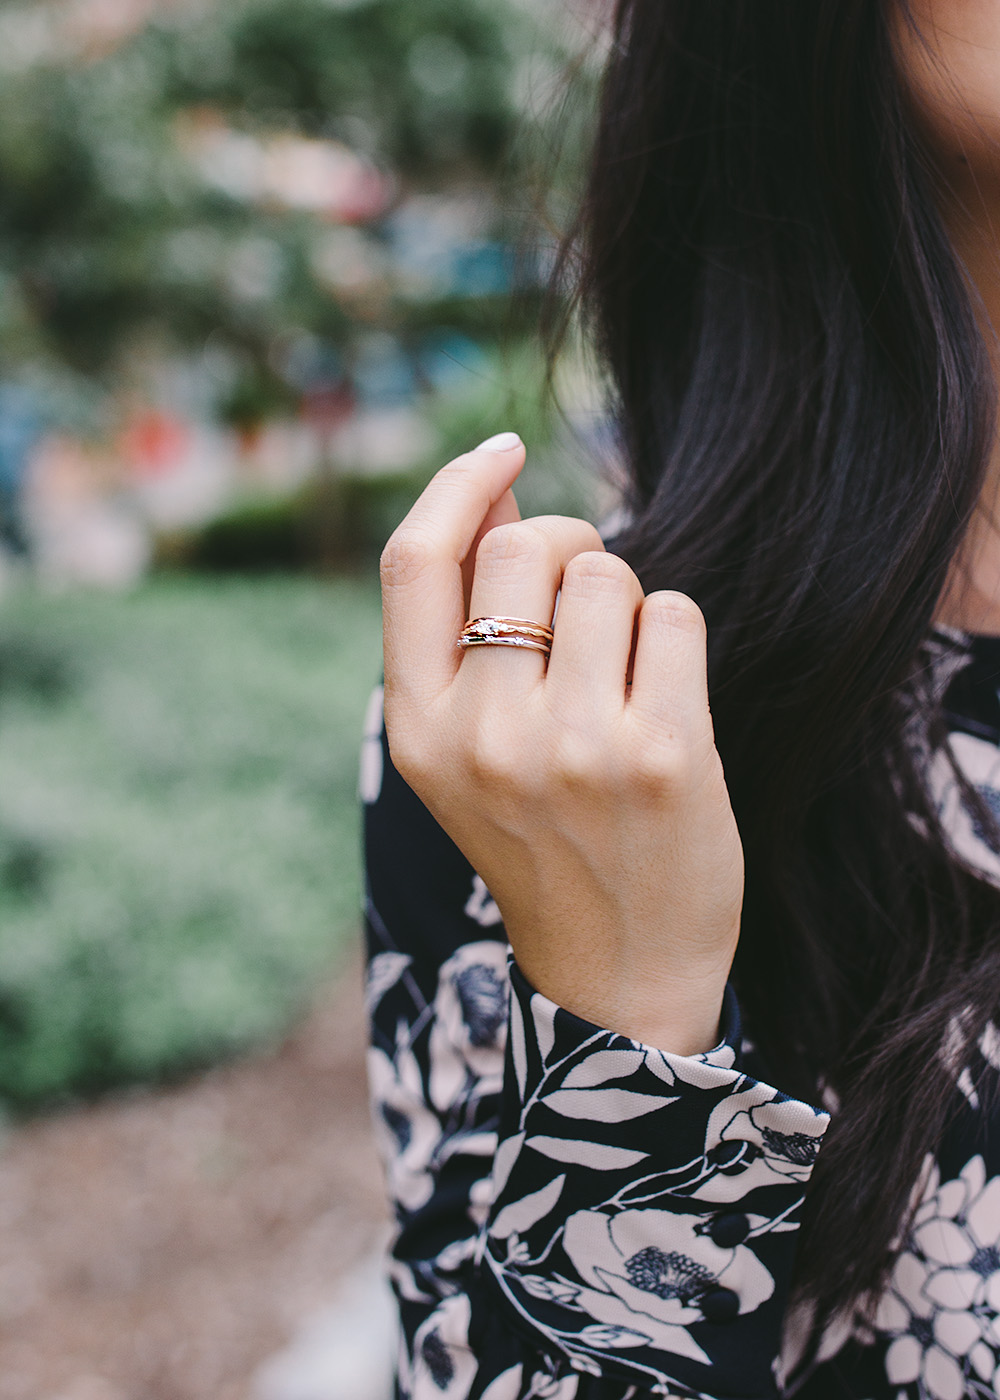 How to Wear Delicate Jewelry